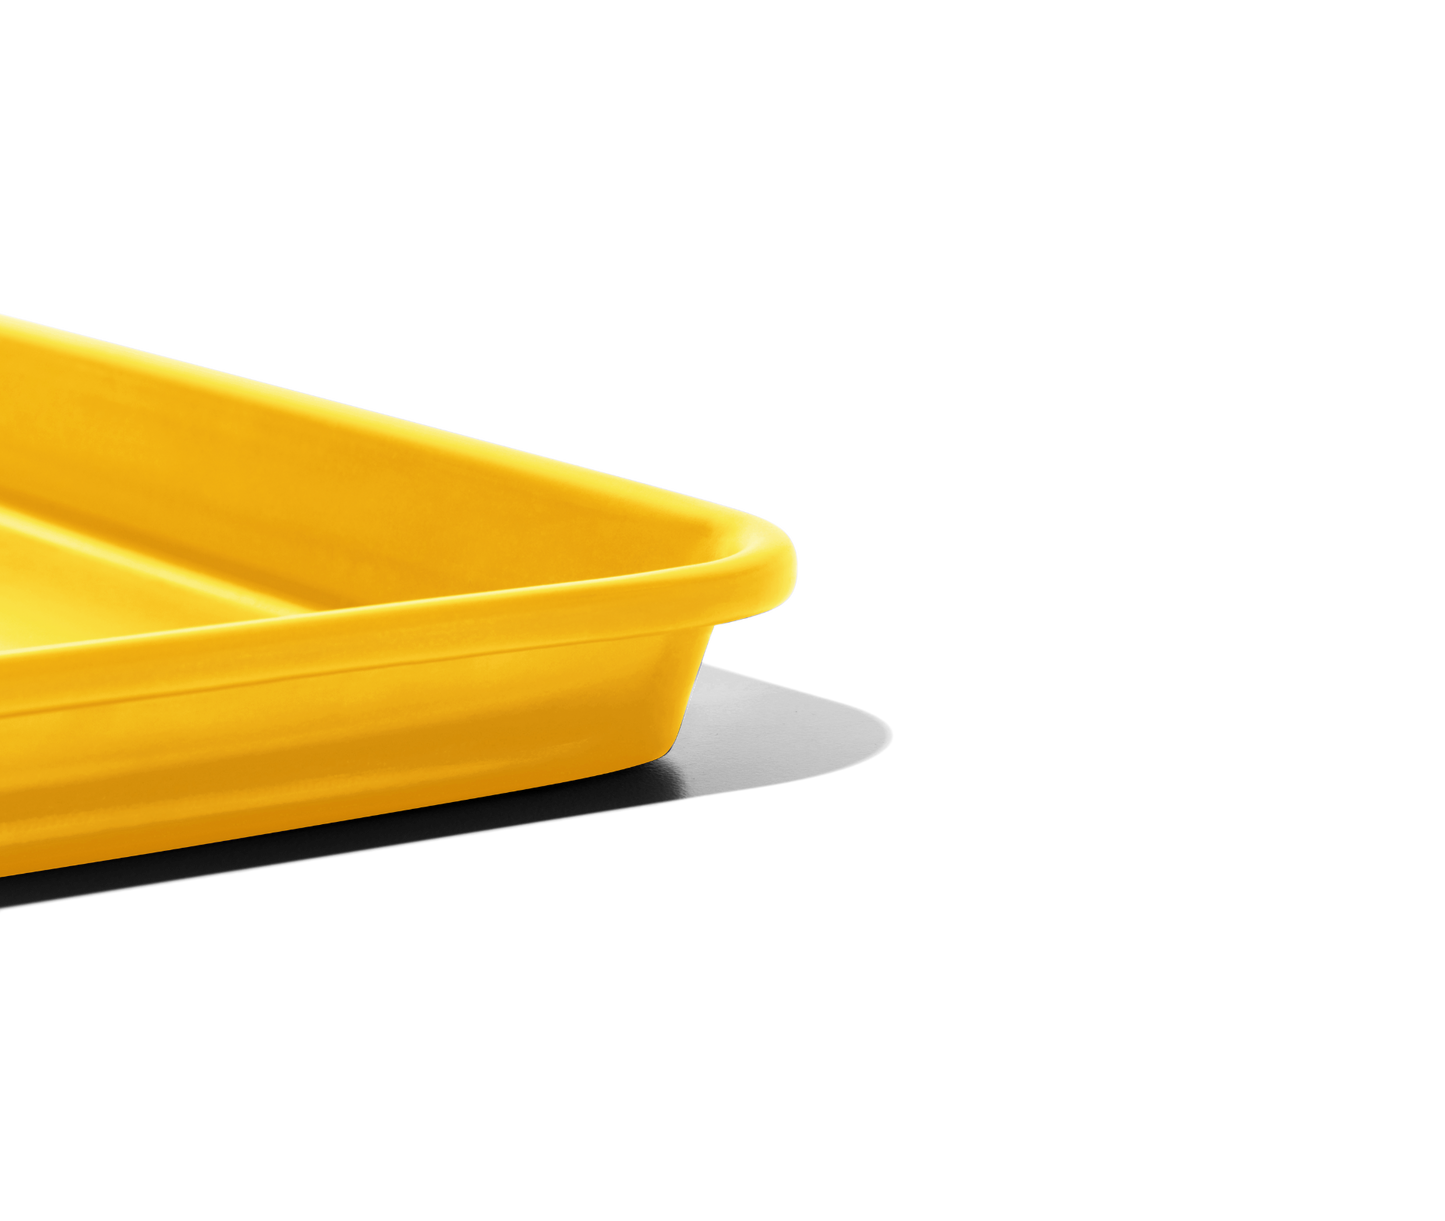 Holy Sheet pan in mustard yellow is a rimmed half-sheet, the perfect size for home kitchens.